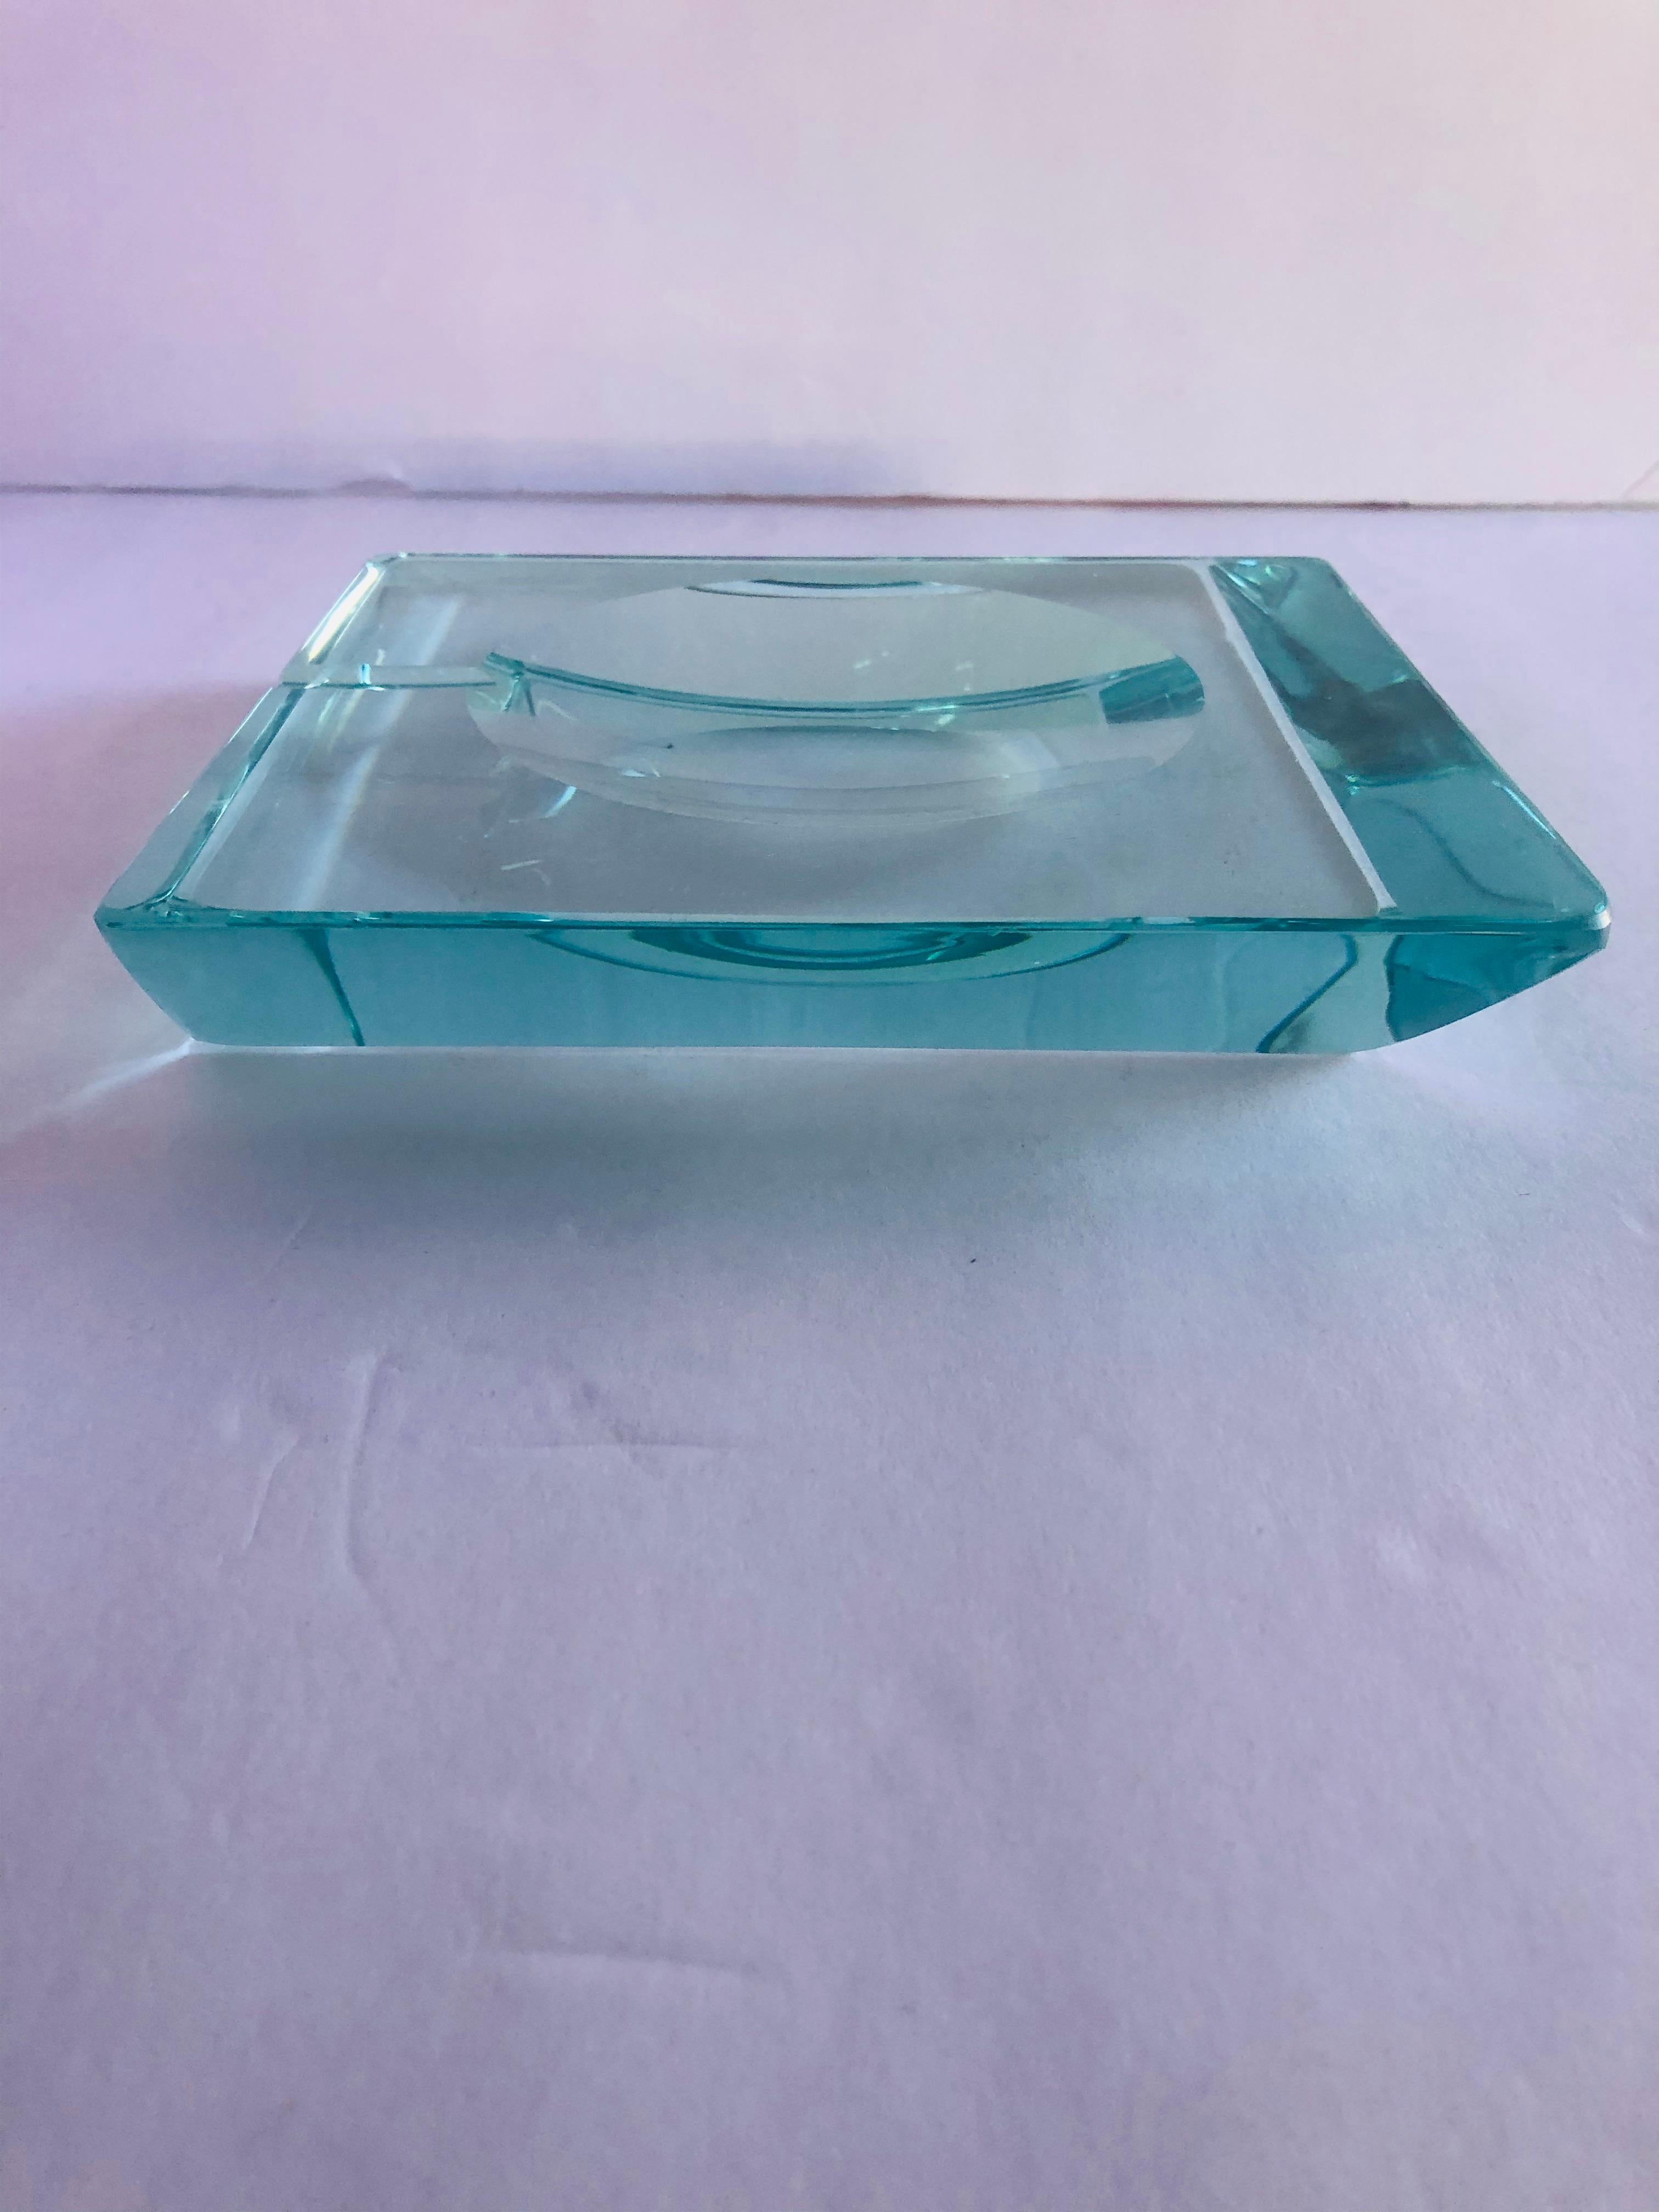 Vintage Italian beveled glass ashtray by Fontana Arte / Made in Italy circa 1960s
Measures: Length 6.75 inches, width 6.75 inches, height 1.25 inches
1 in stock in Palm Springs ON 20% OFF SALE for $792 !!!
Order Reference: FABIOLTD G79
This piece